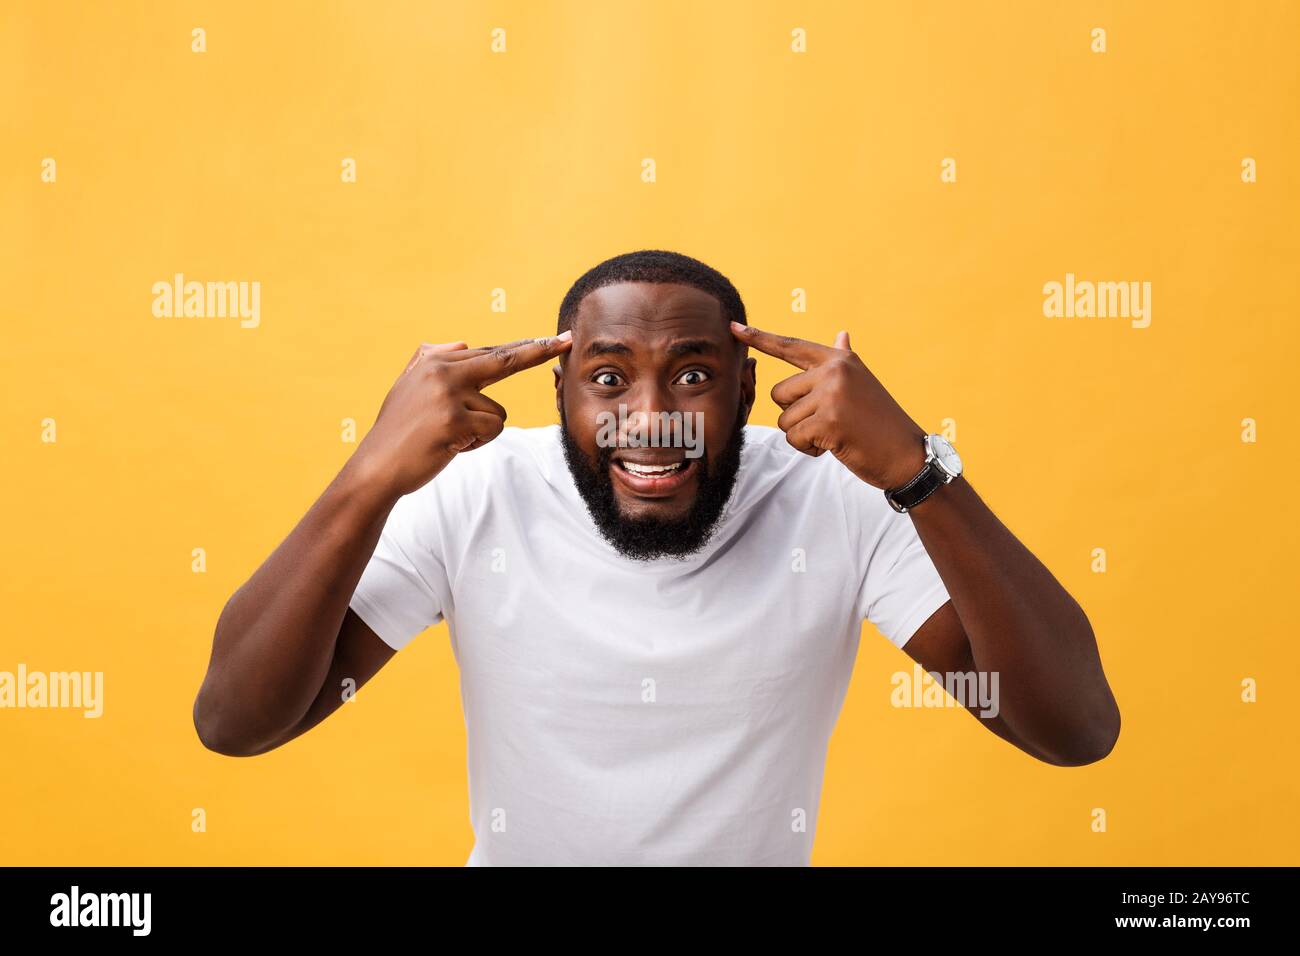 Portrait of african american man with hands raised in shock and disbelief. Isolated over yellow background. Stock Photo